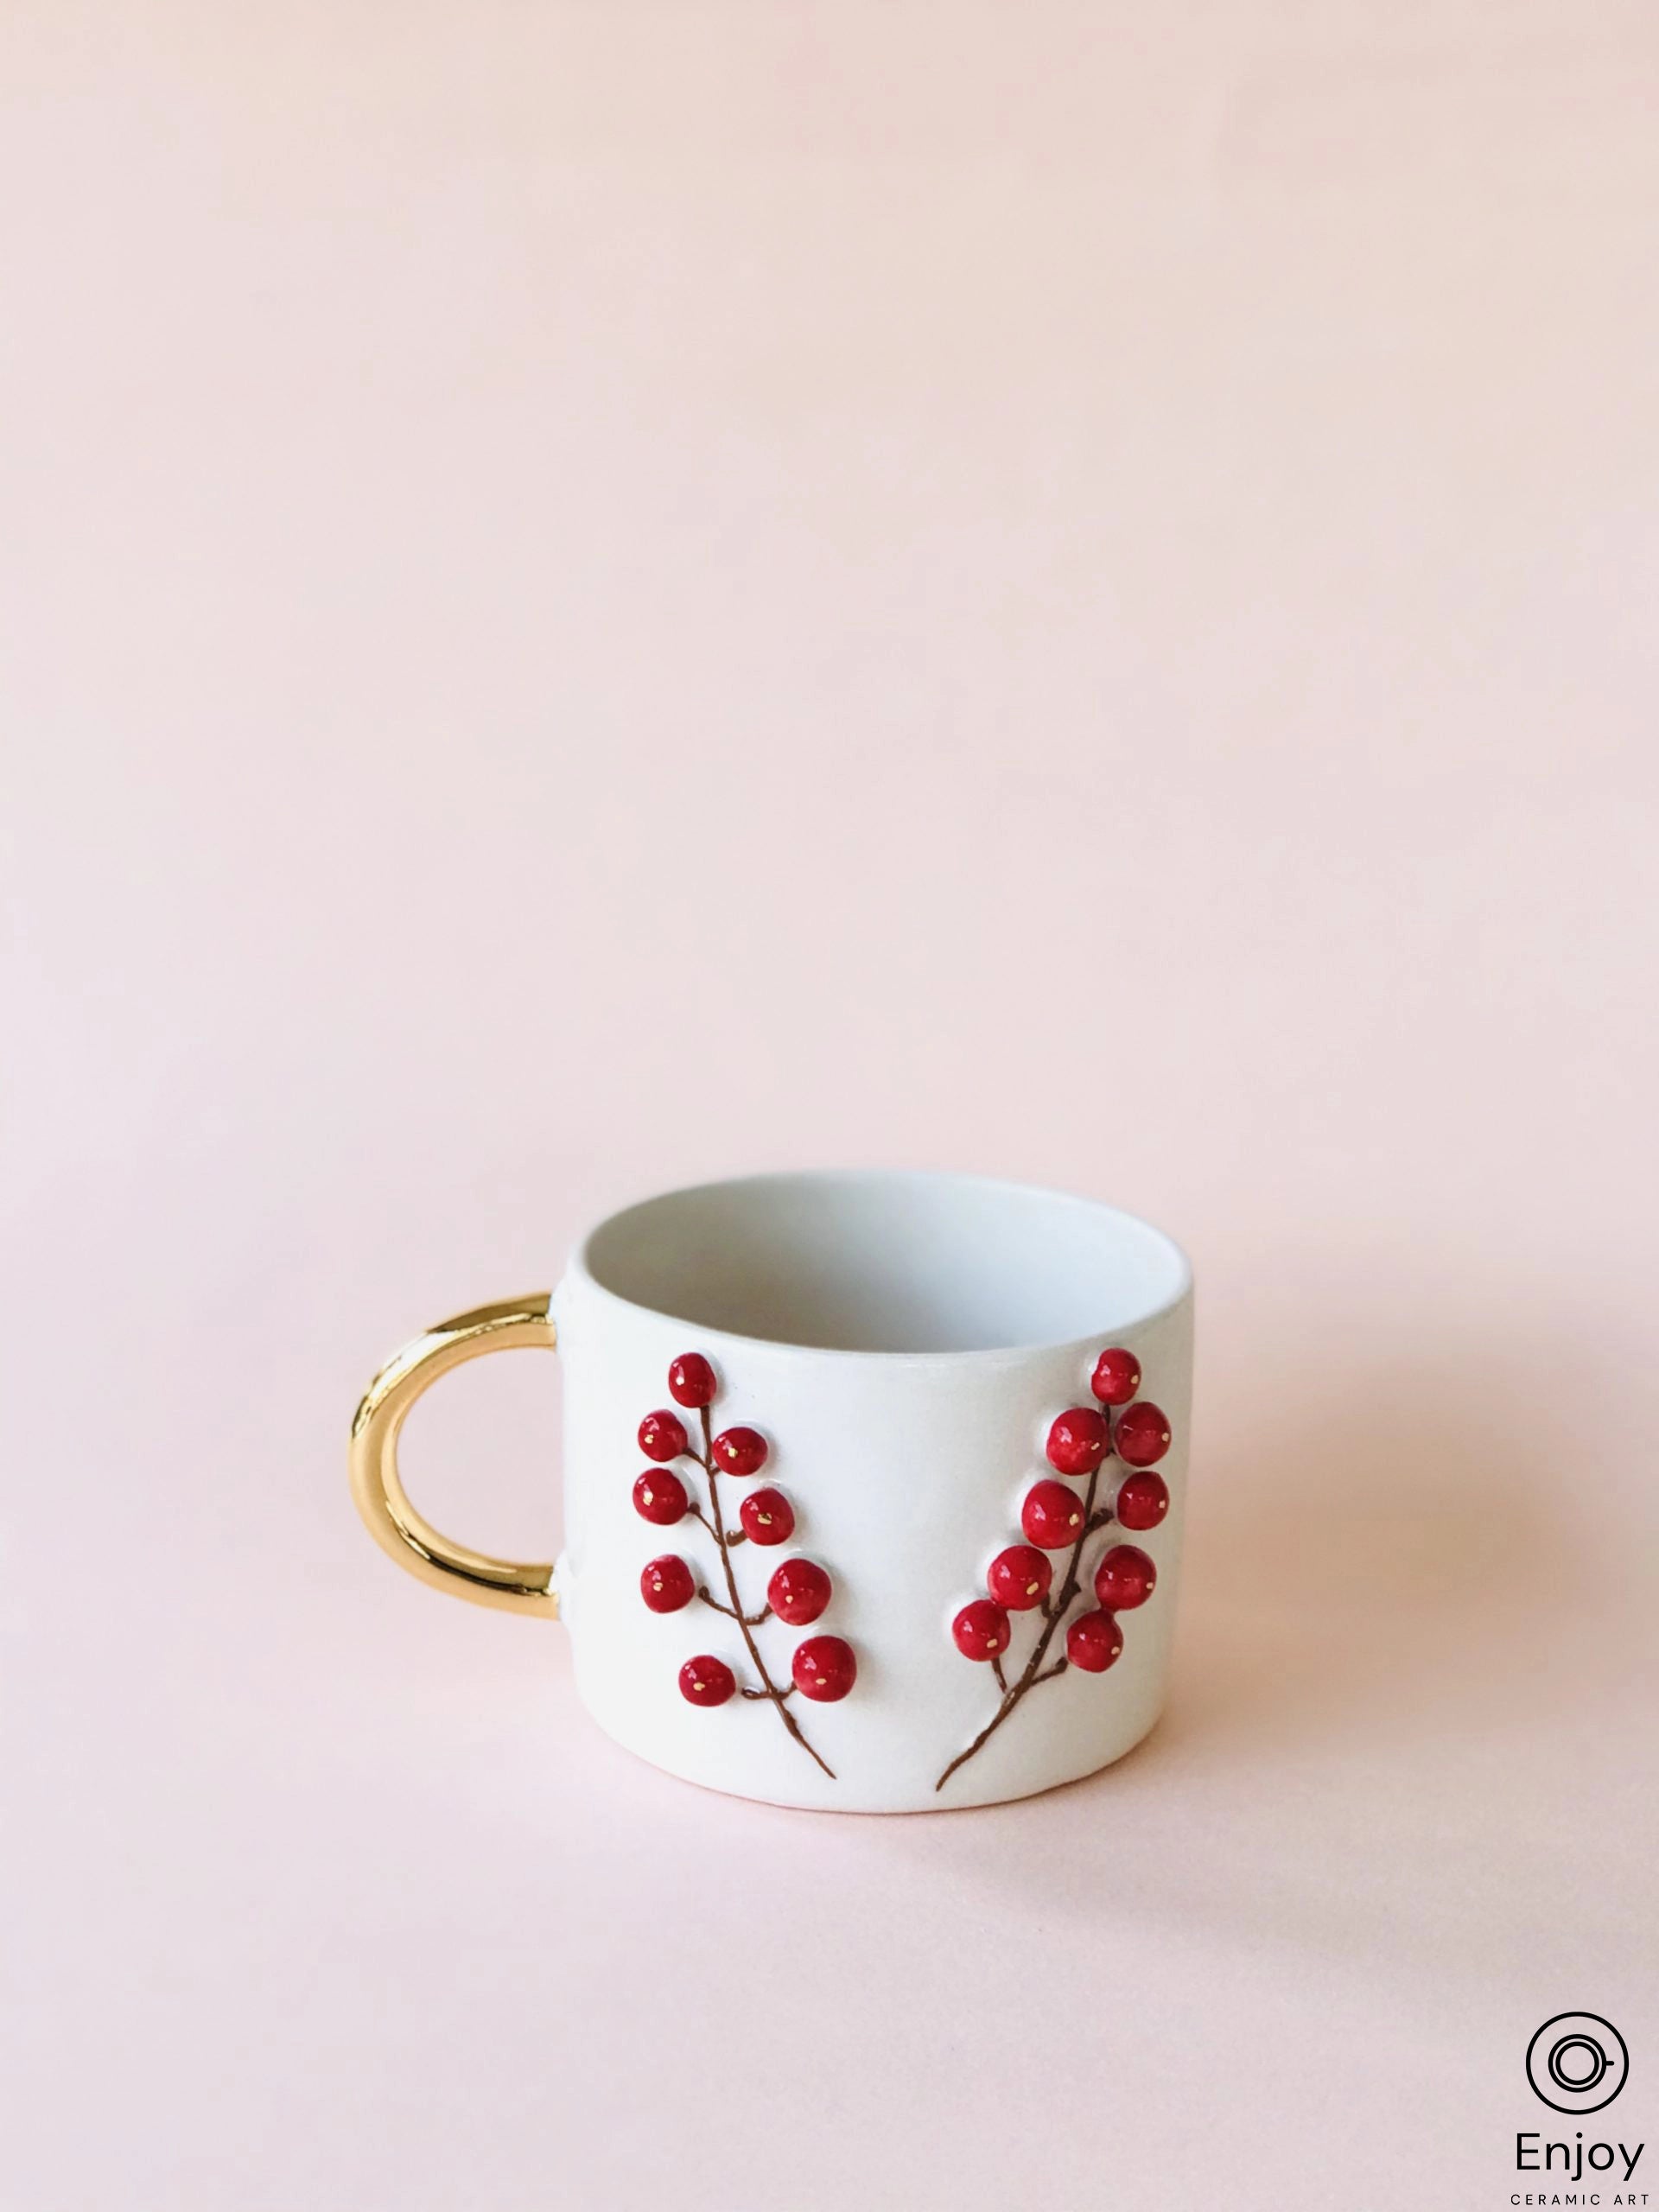 Elegant espresso cup with sculpted winterberry design and gold handle on a pink background, crafted by Enjoy Ceramic Art.